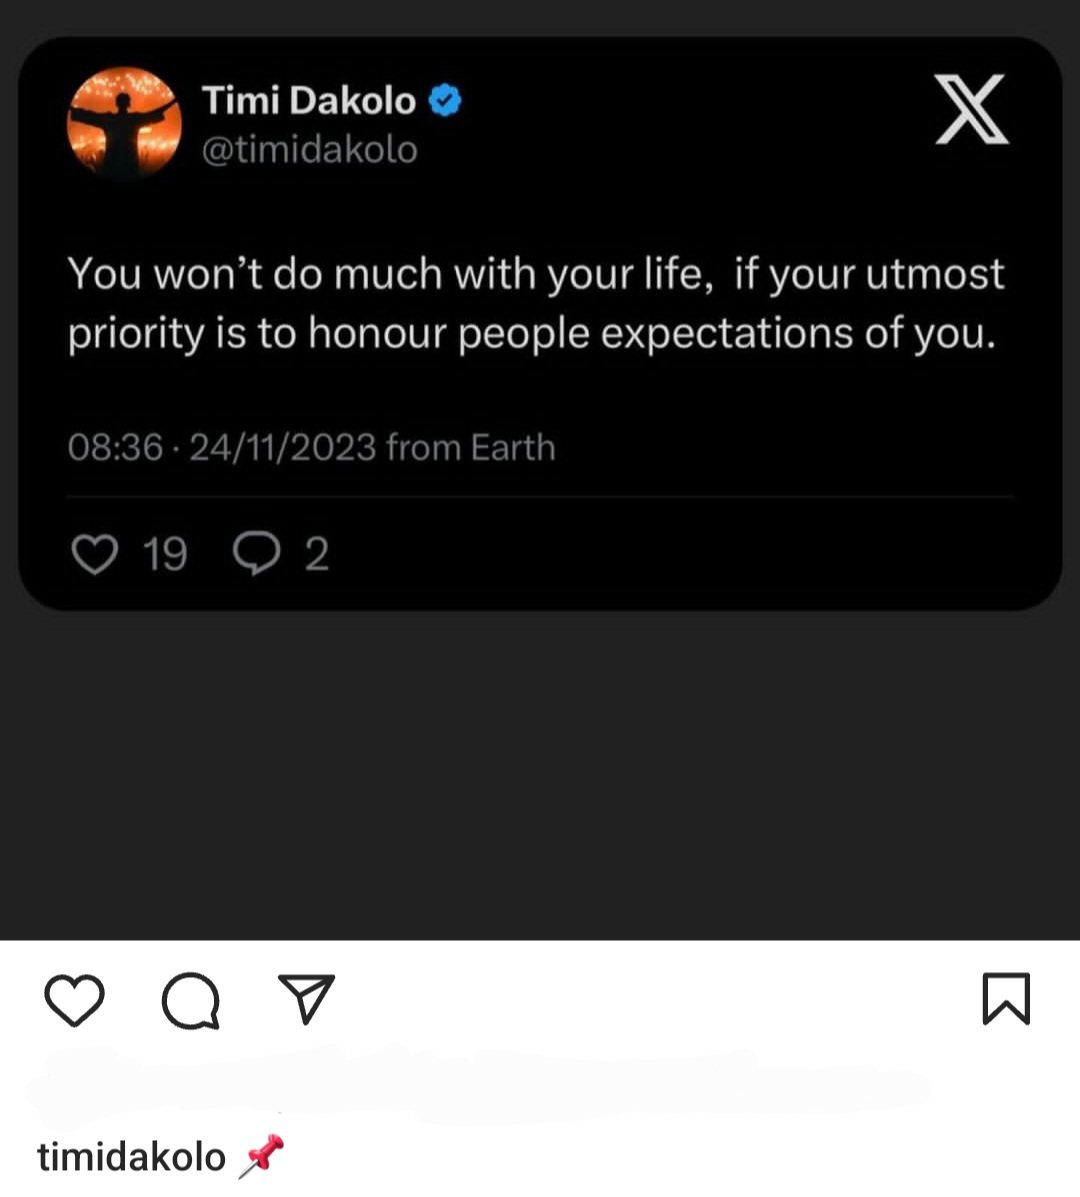 Timi Dakolo advices people against prioritising other people